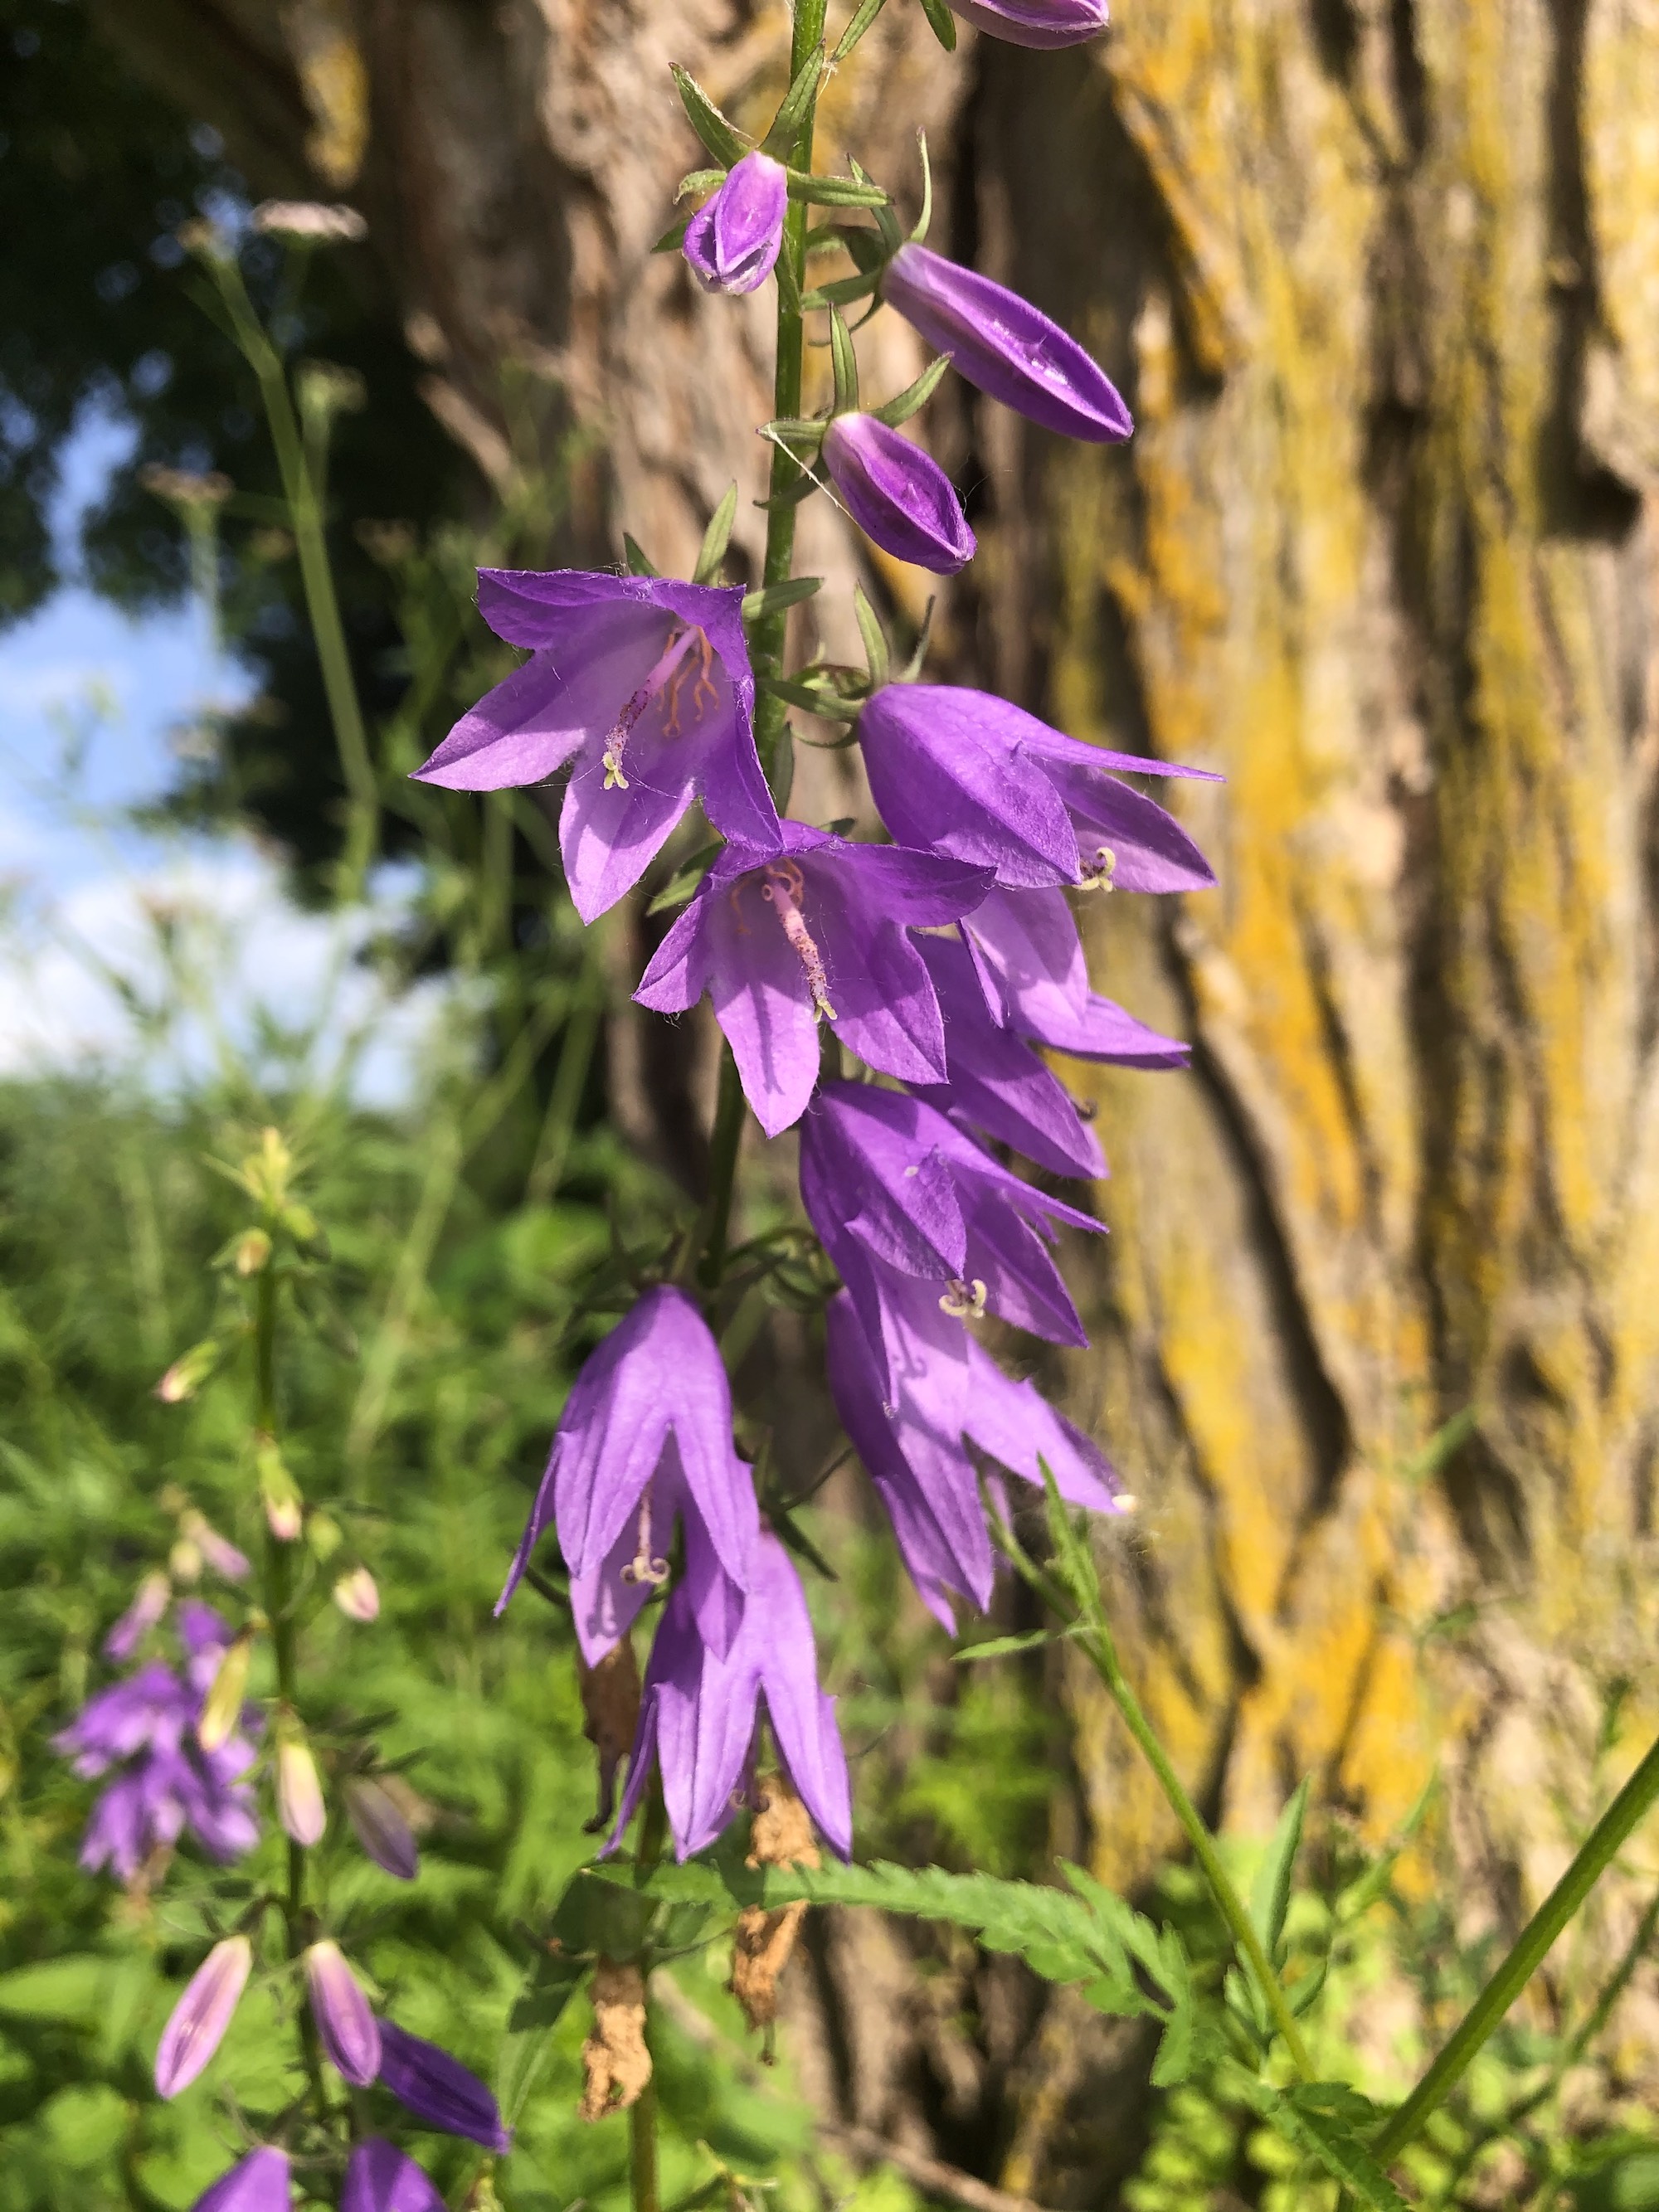 Creeping Bellflower on Manitou Way in Madison, Wisconsin on June 29, 2020.